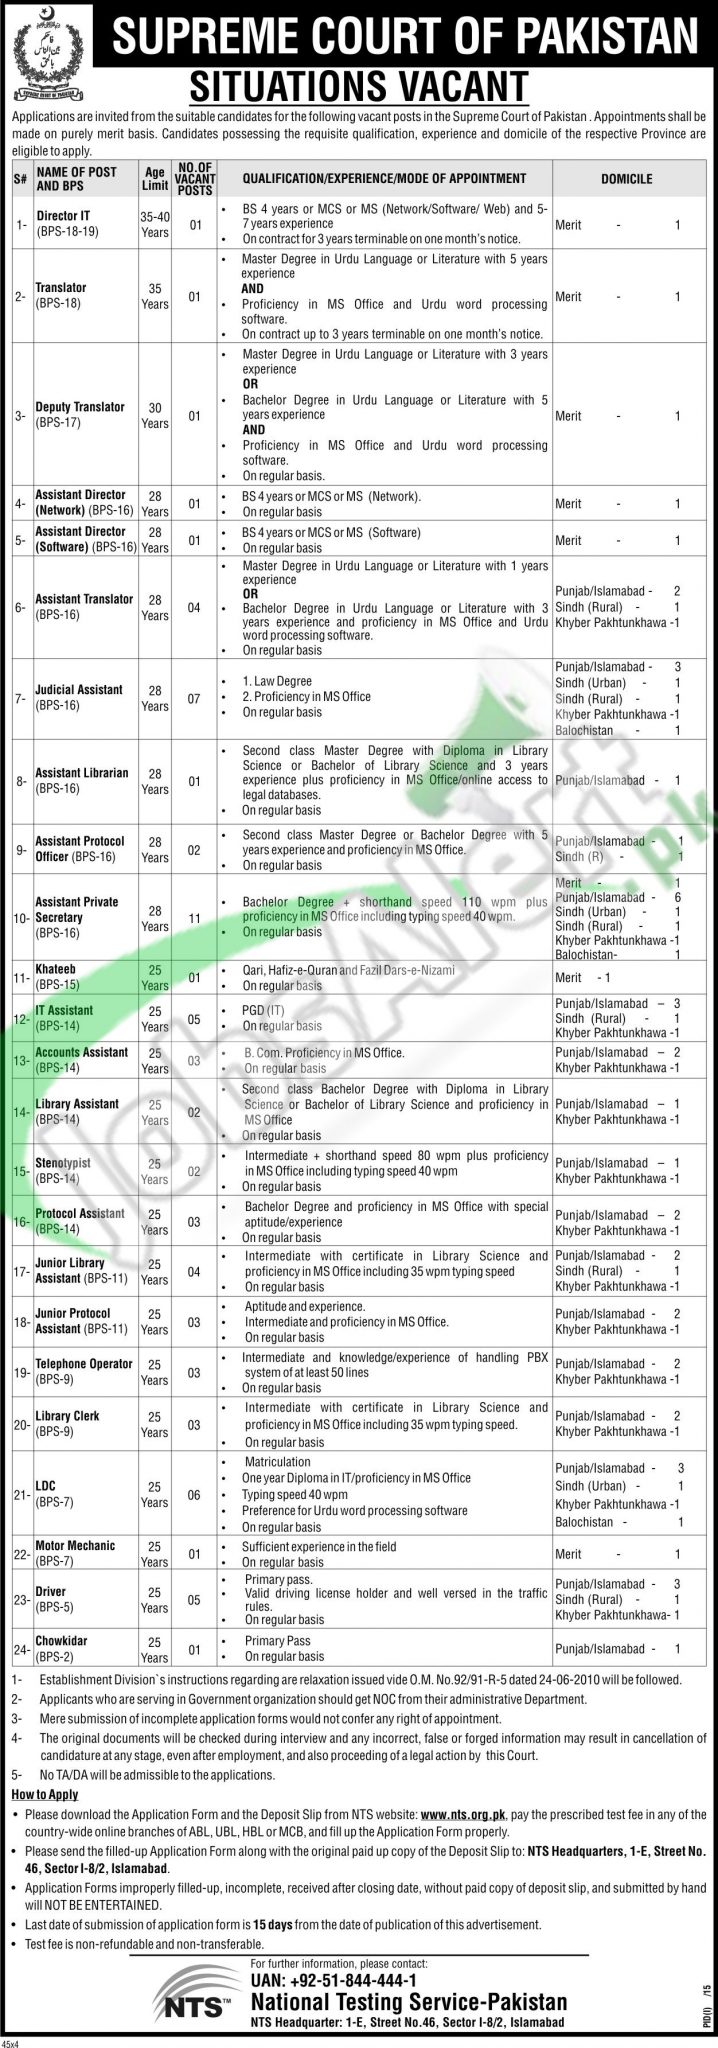 Vacant Situations in Supreme Court of Pakistan for Director, Translator and Assistant Librarian